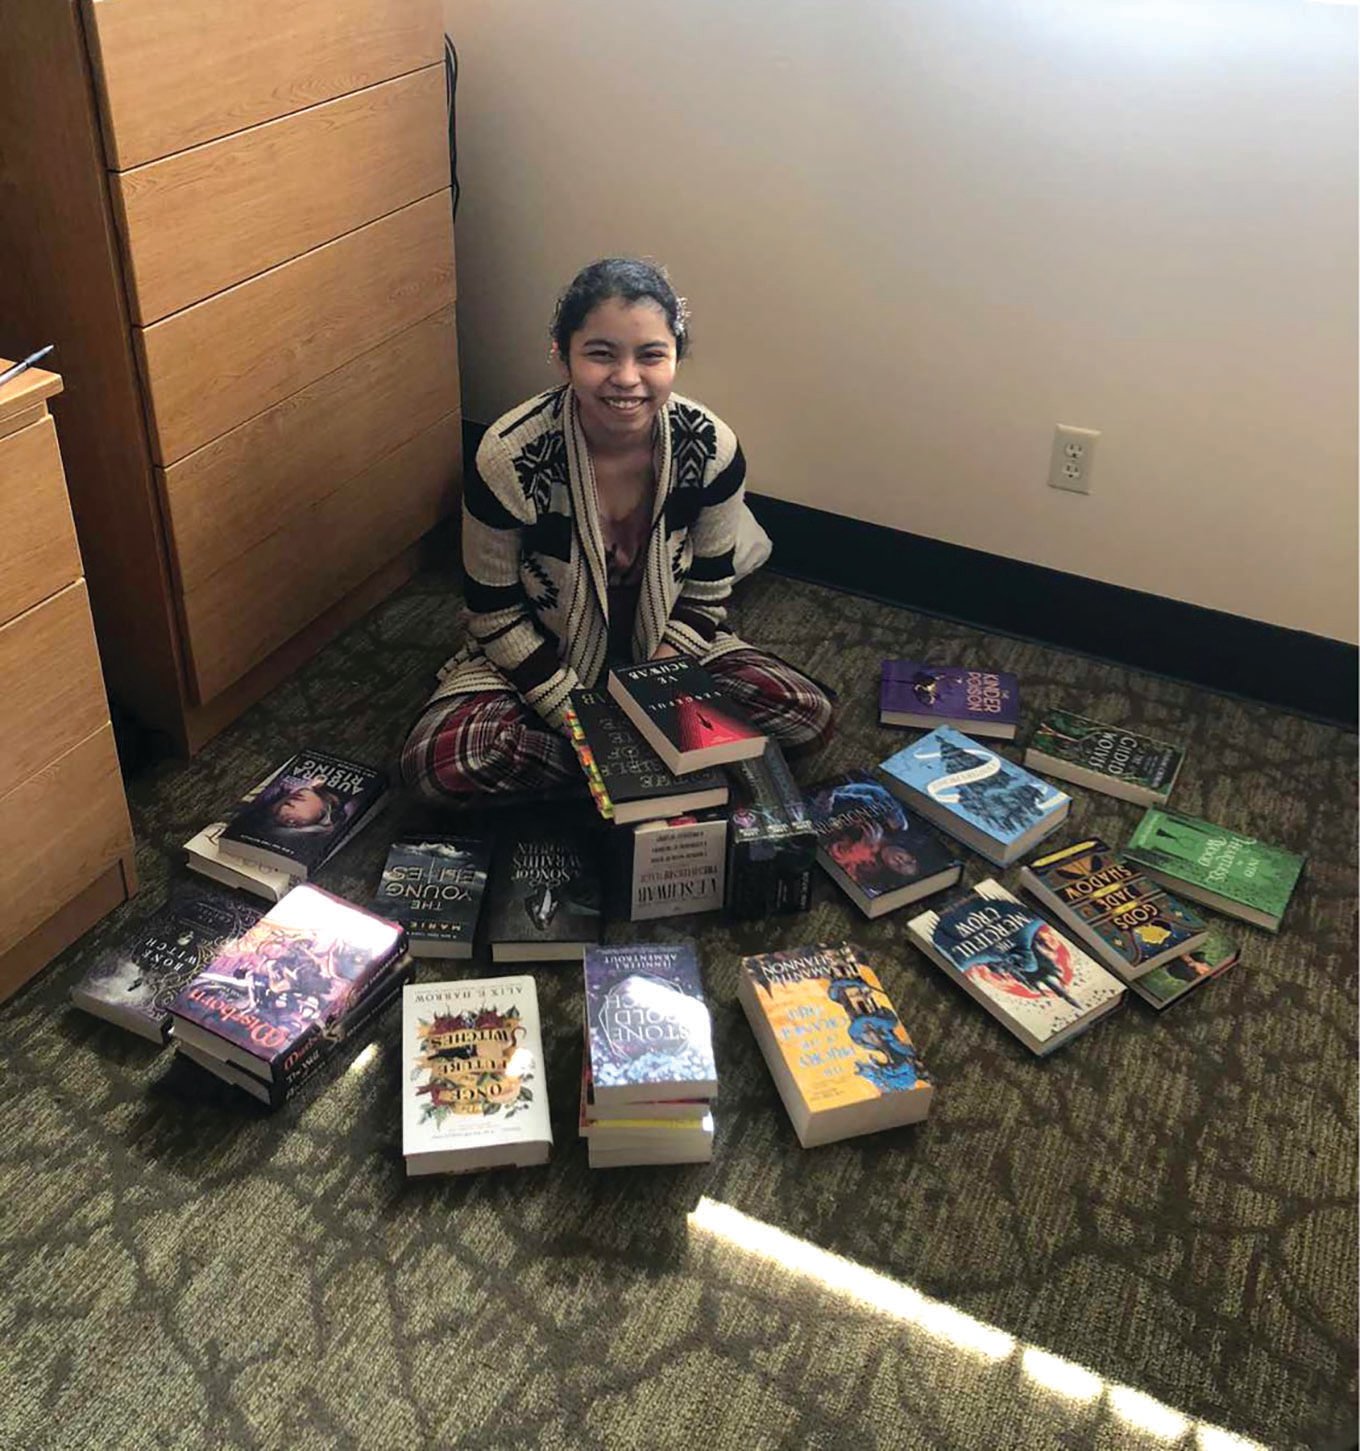 Selena Jarquin-Vanegas indulged her love of reading by purchasing more than 30 books with her scholarship money.